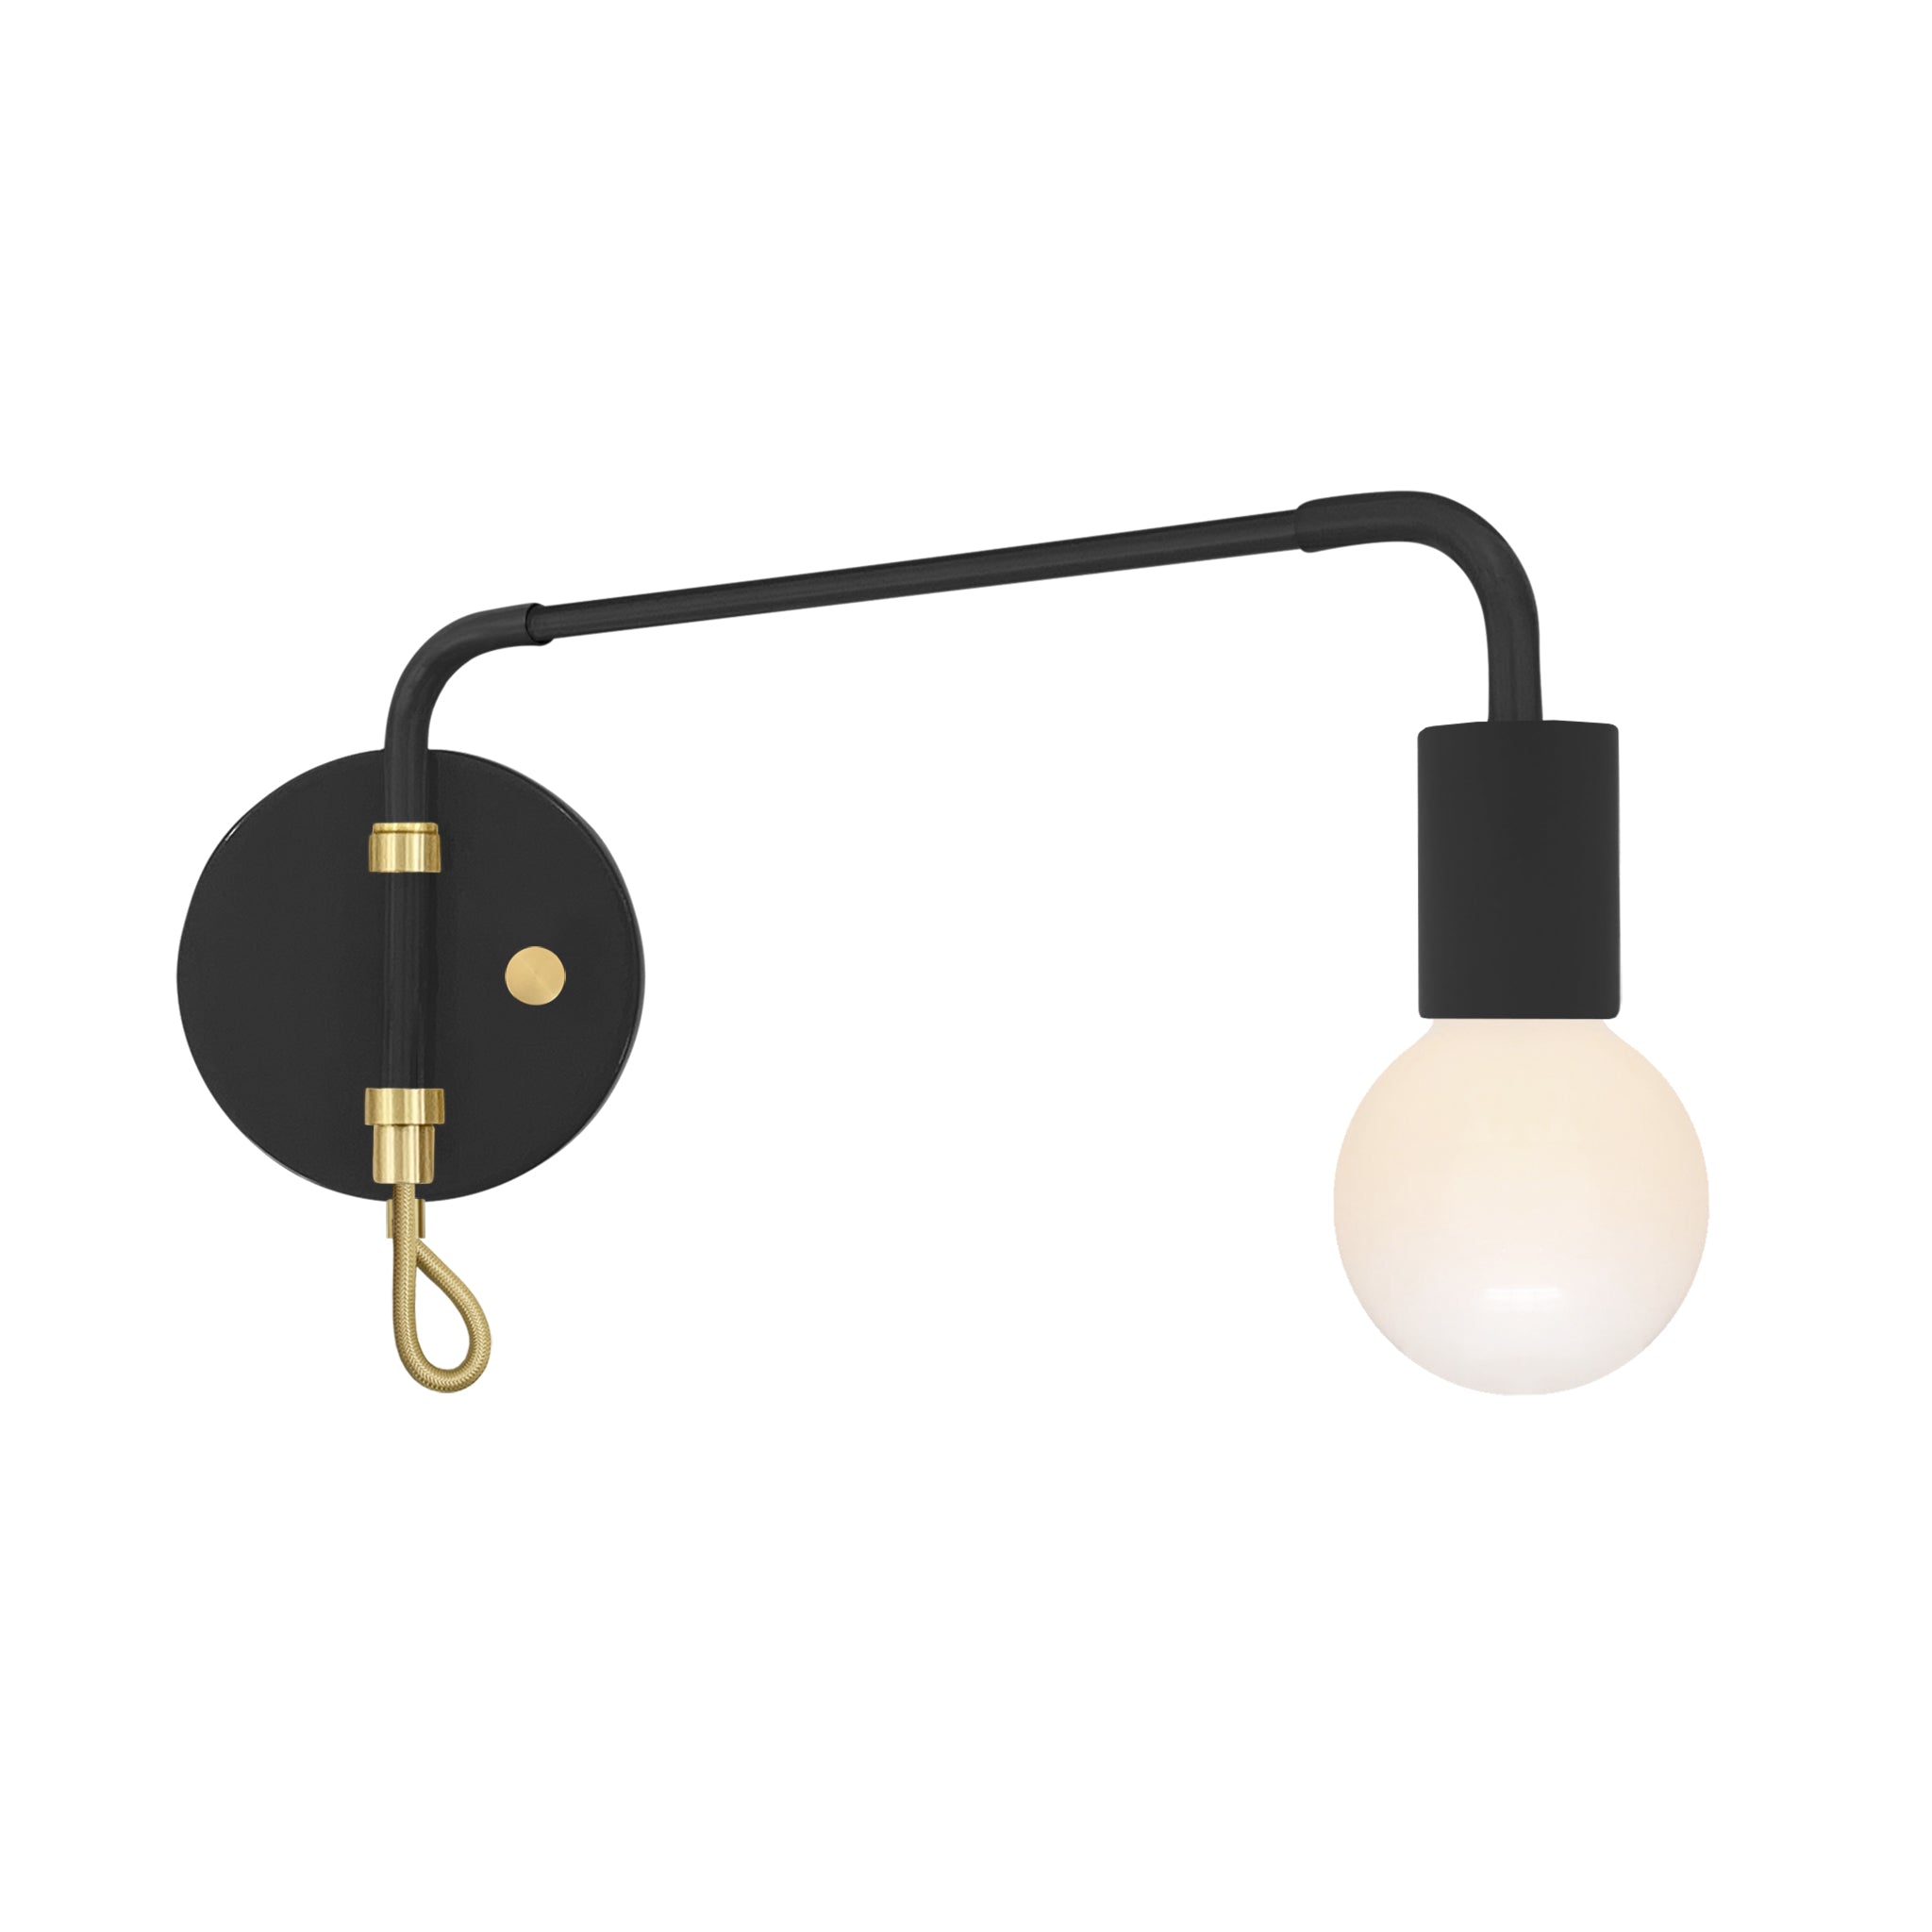 Brass and black color Sway sconce Dutton Brown lighting